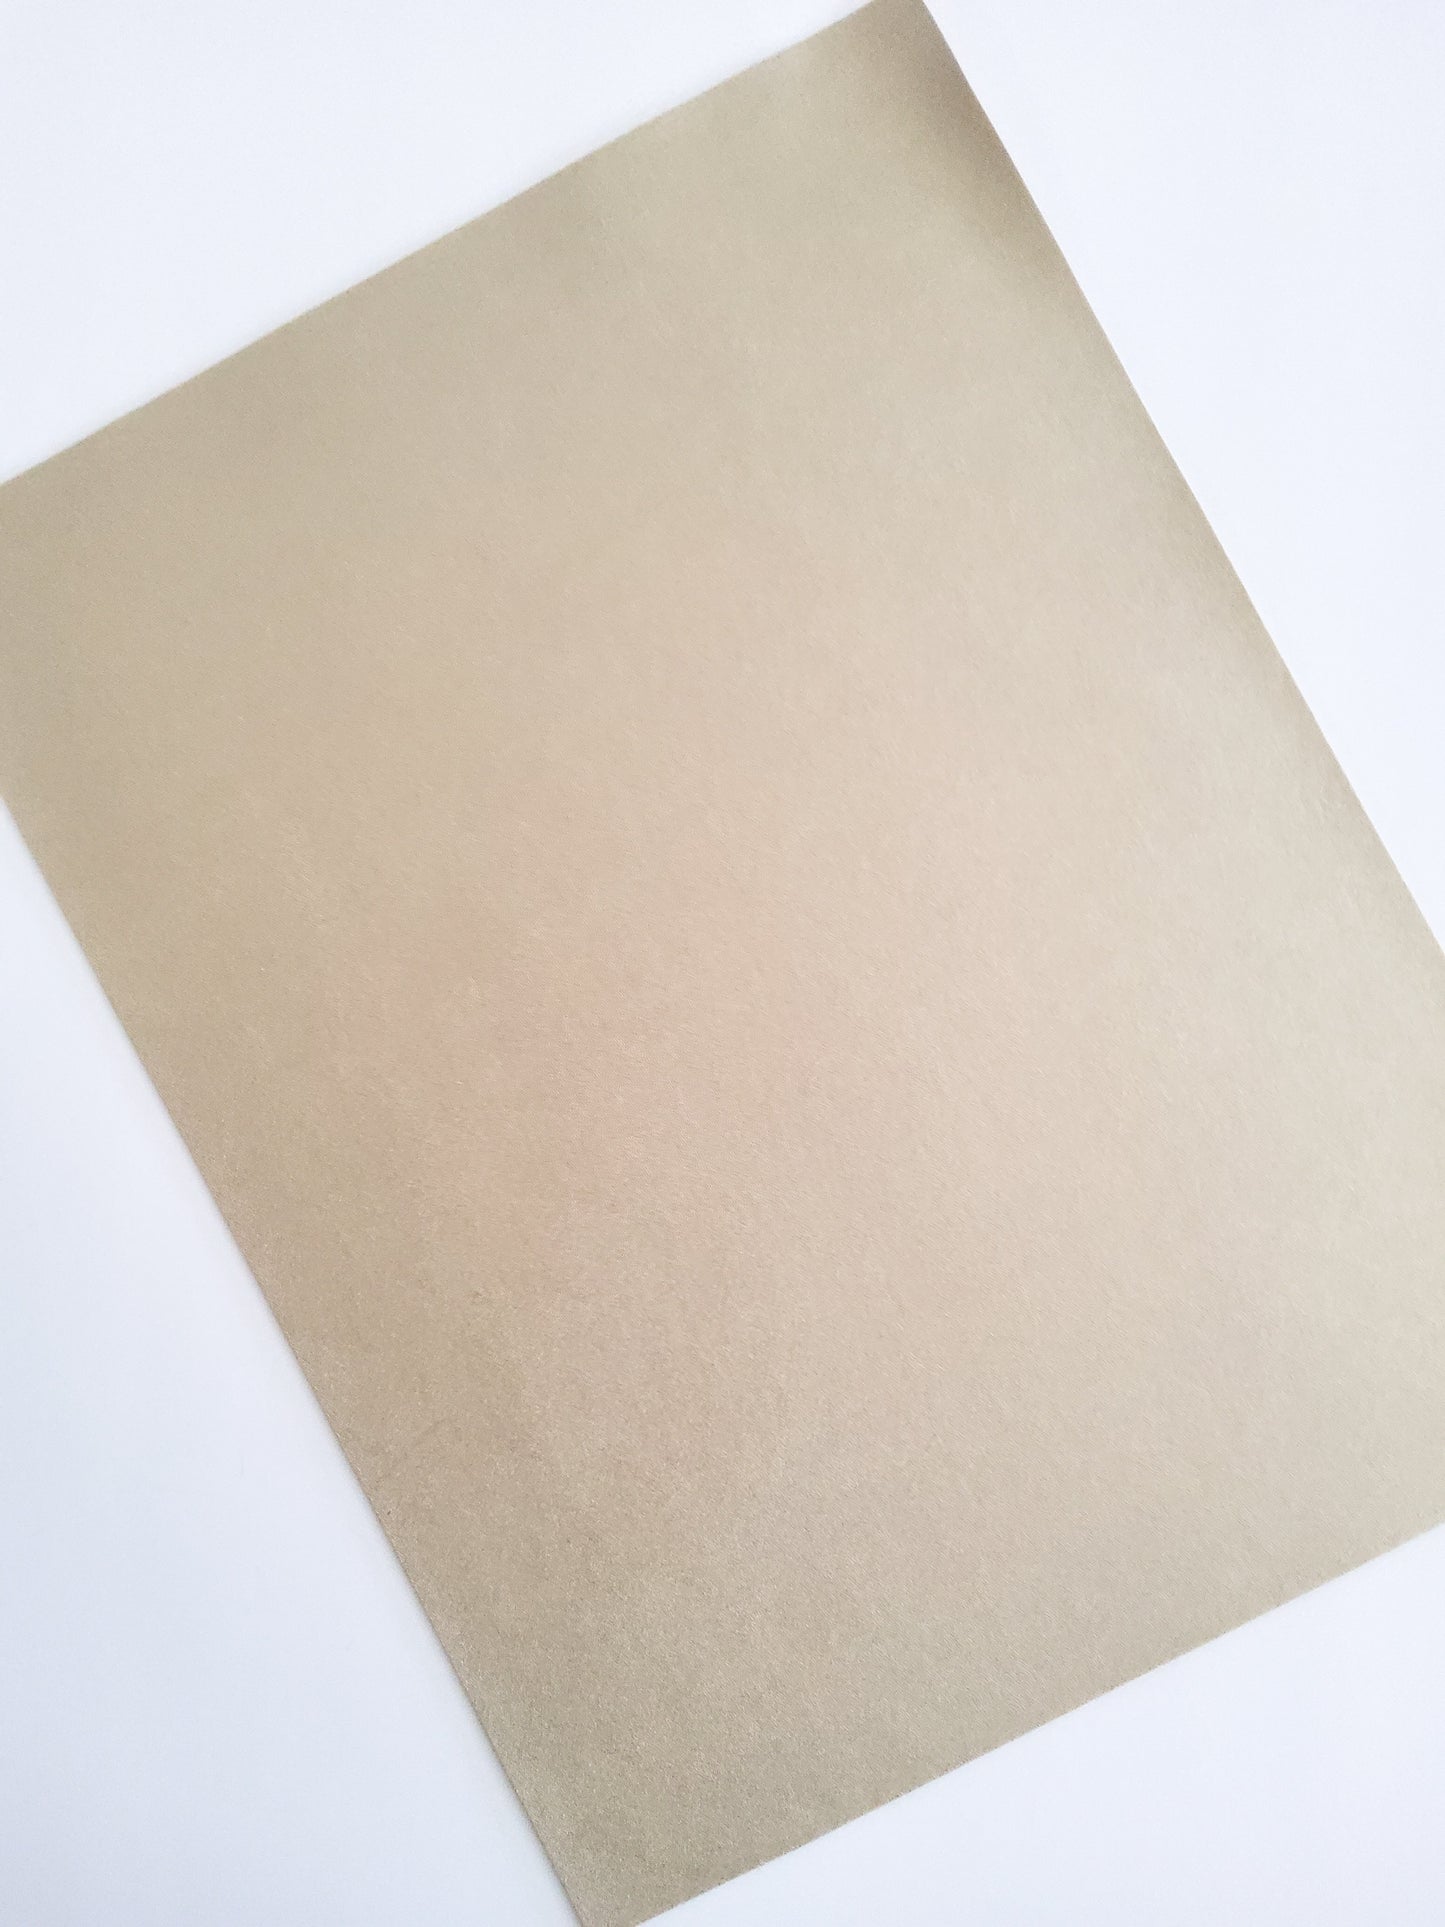 Gold Shimmer Smooth 9x12 faux leather sheet